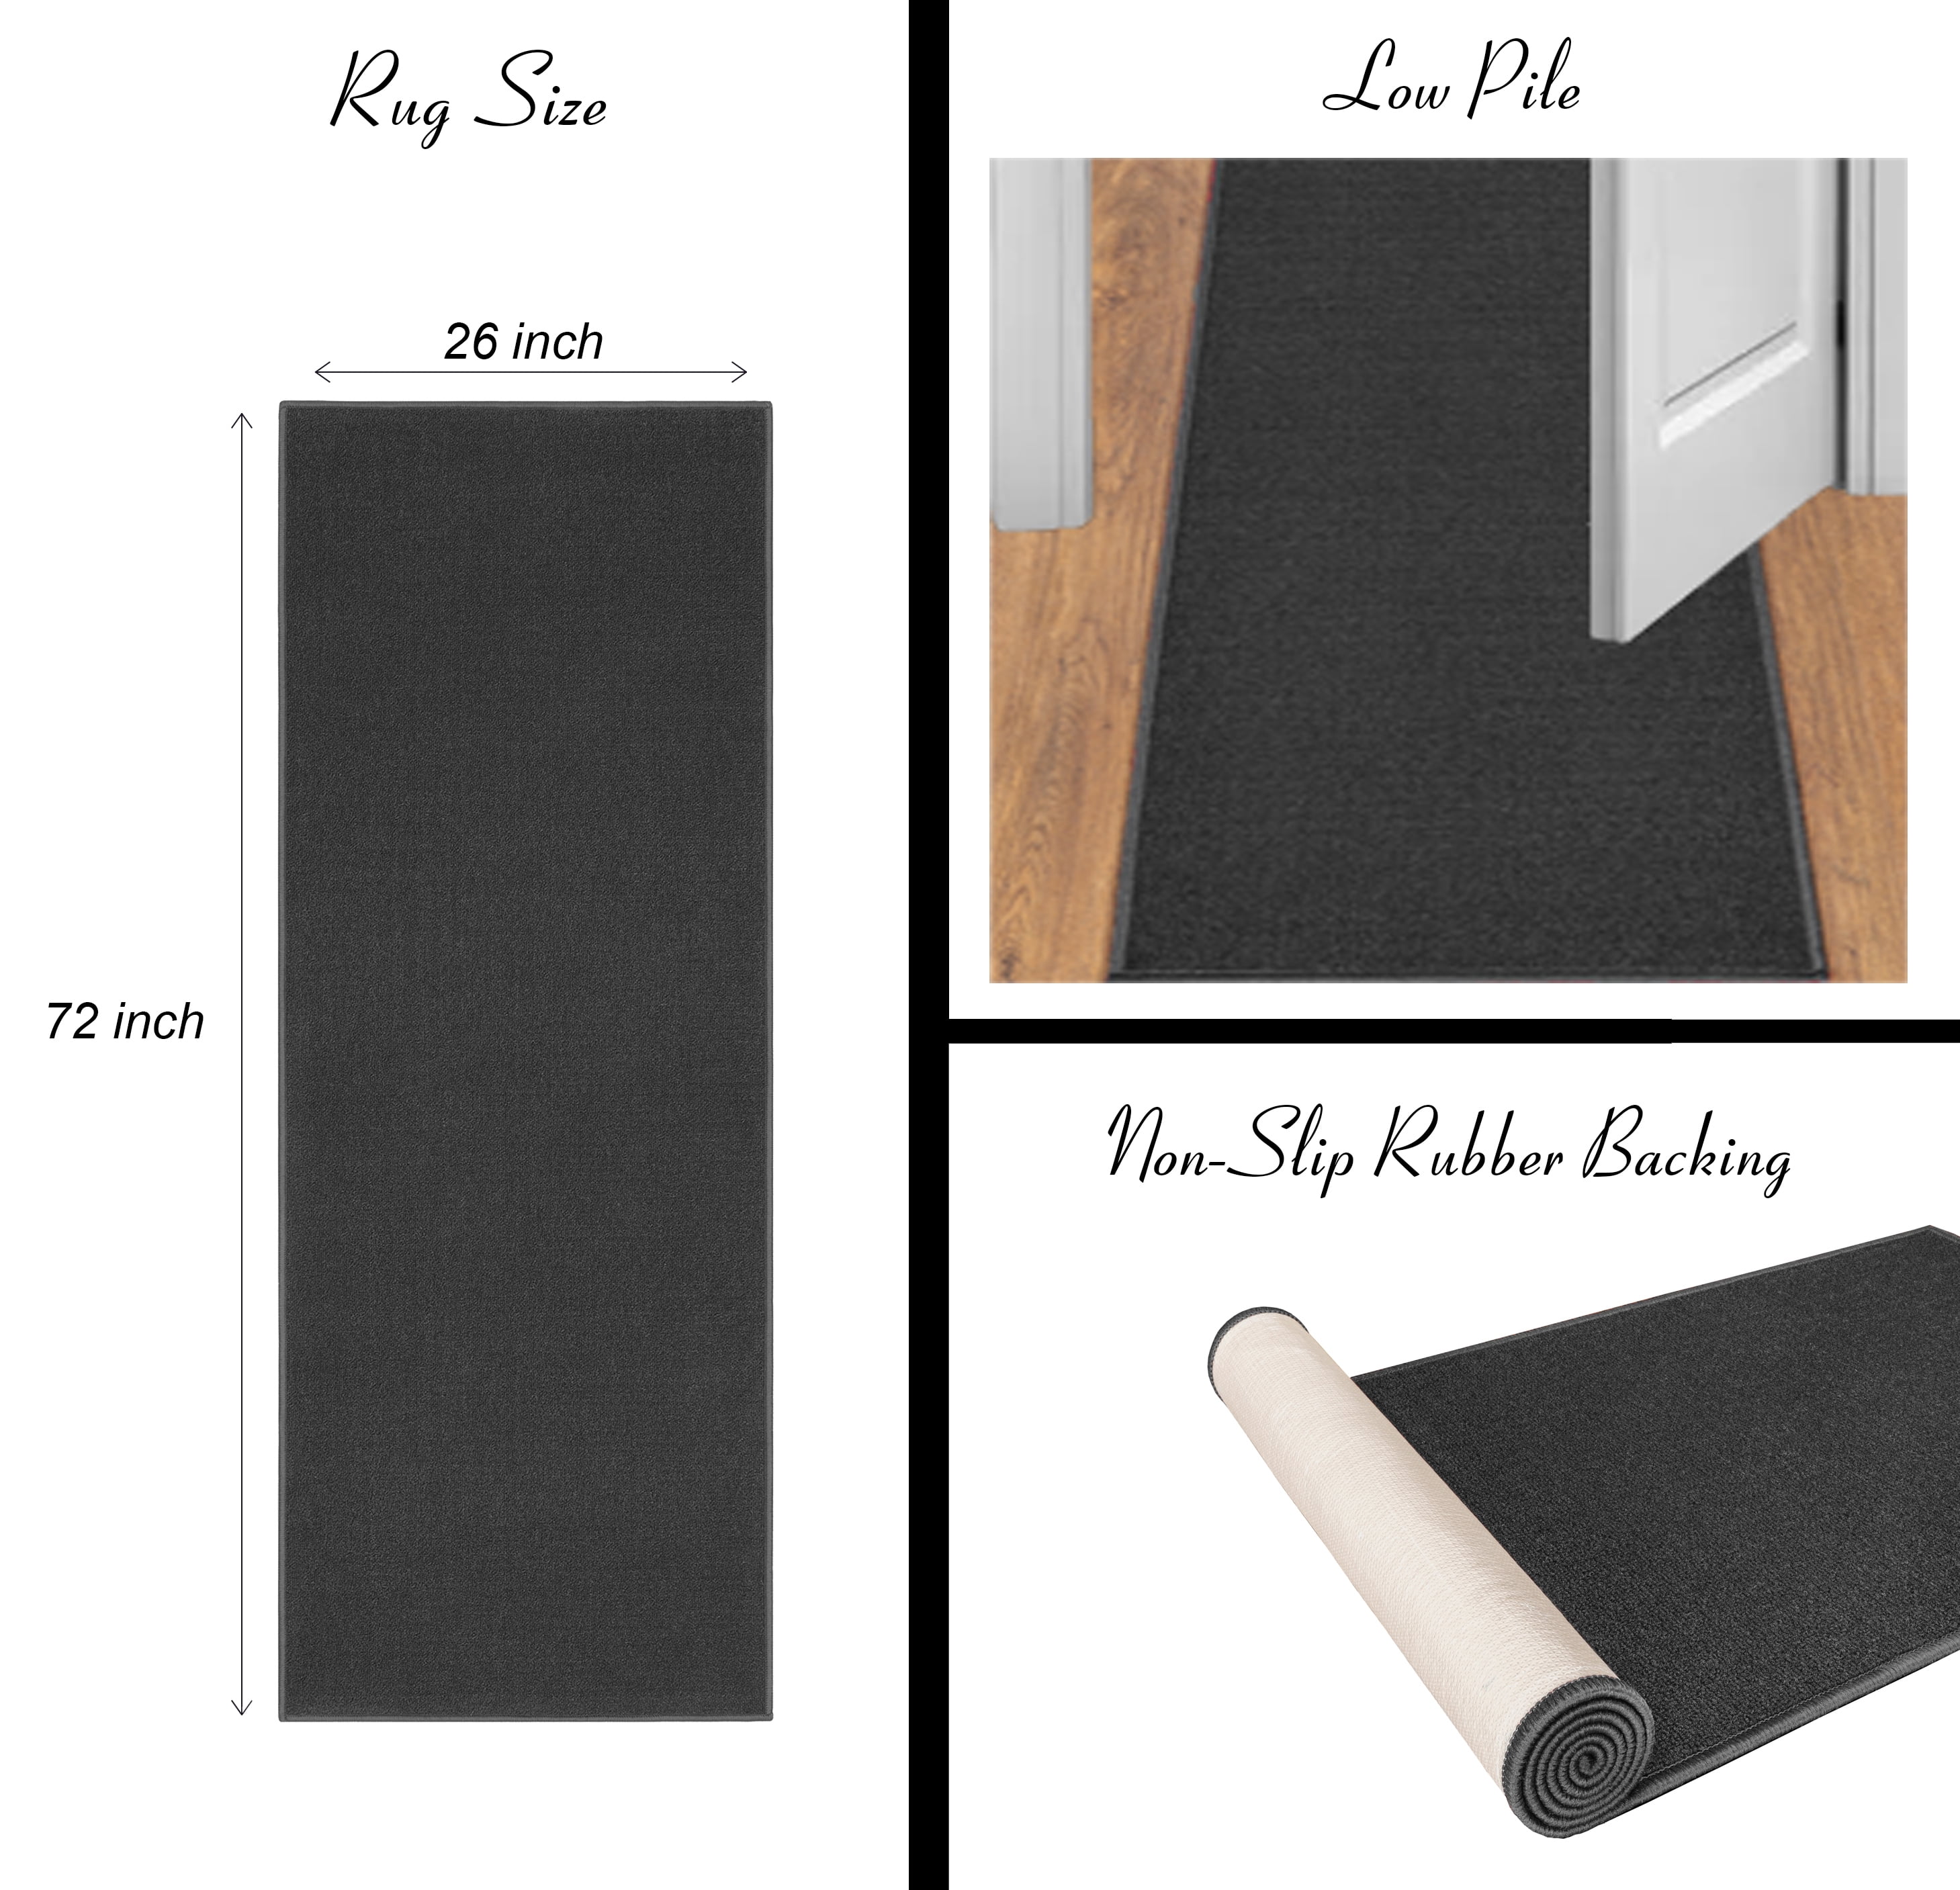 Nourison RugLoc 2 ft. x 11 ft. Non-Slip Dual Surface Runner Rug Pad 160188  - The Home Depot